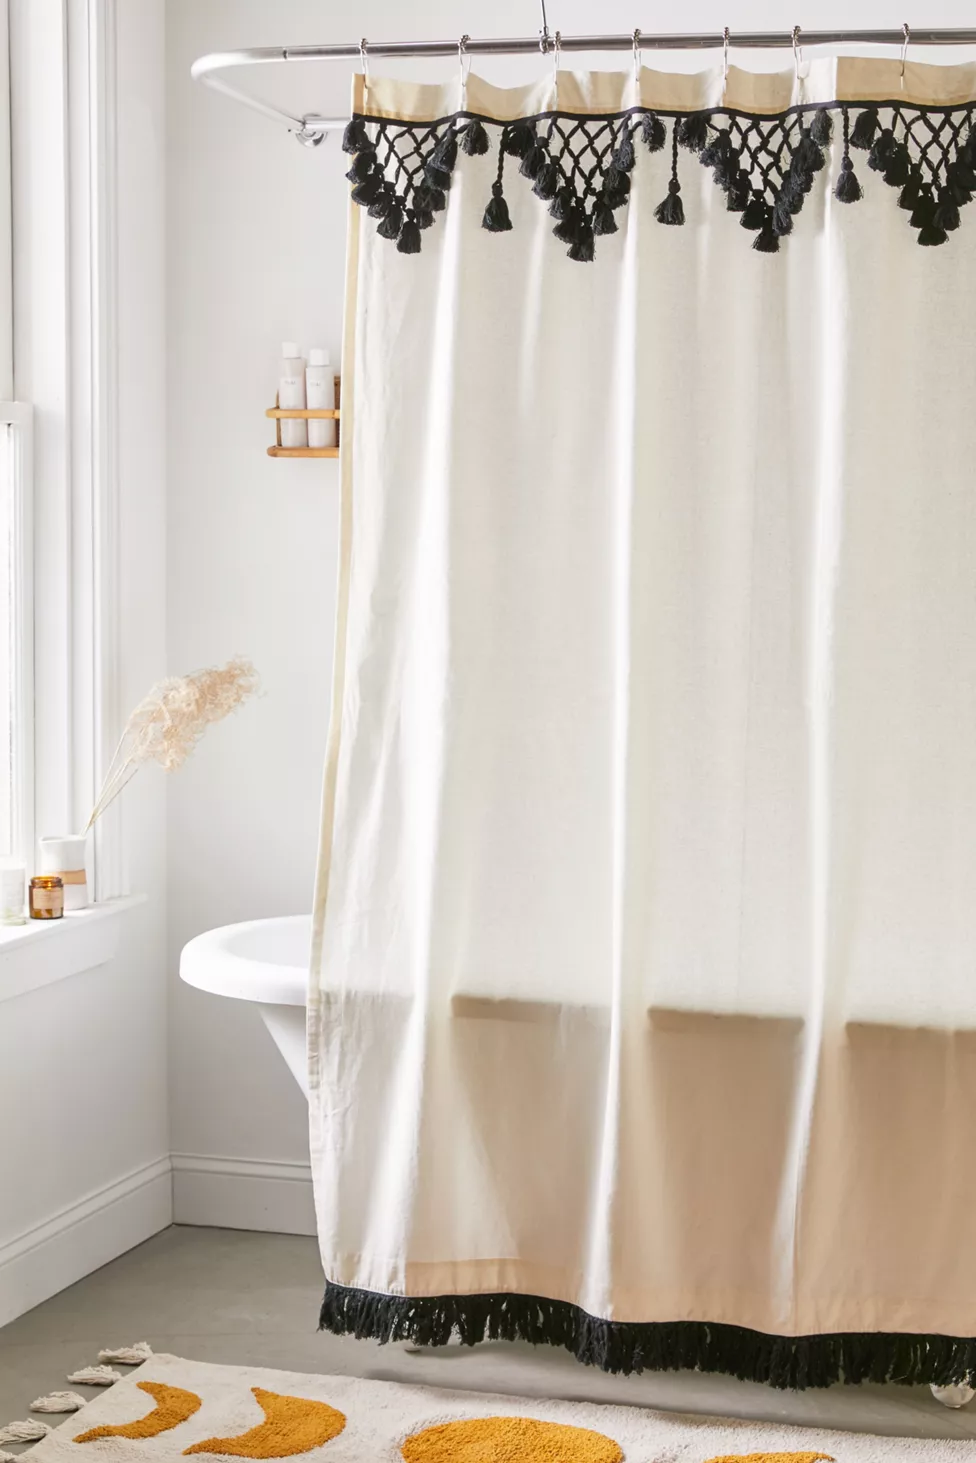 Try a Fringe Shower Curtain